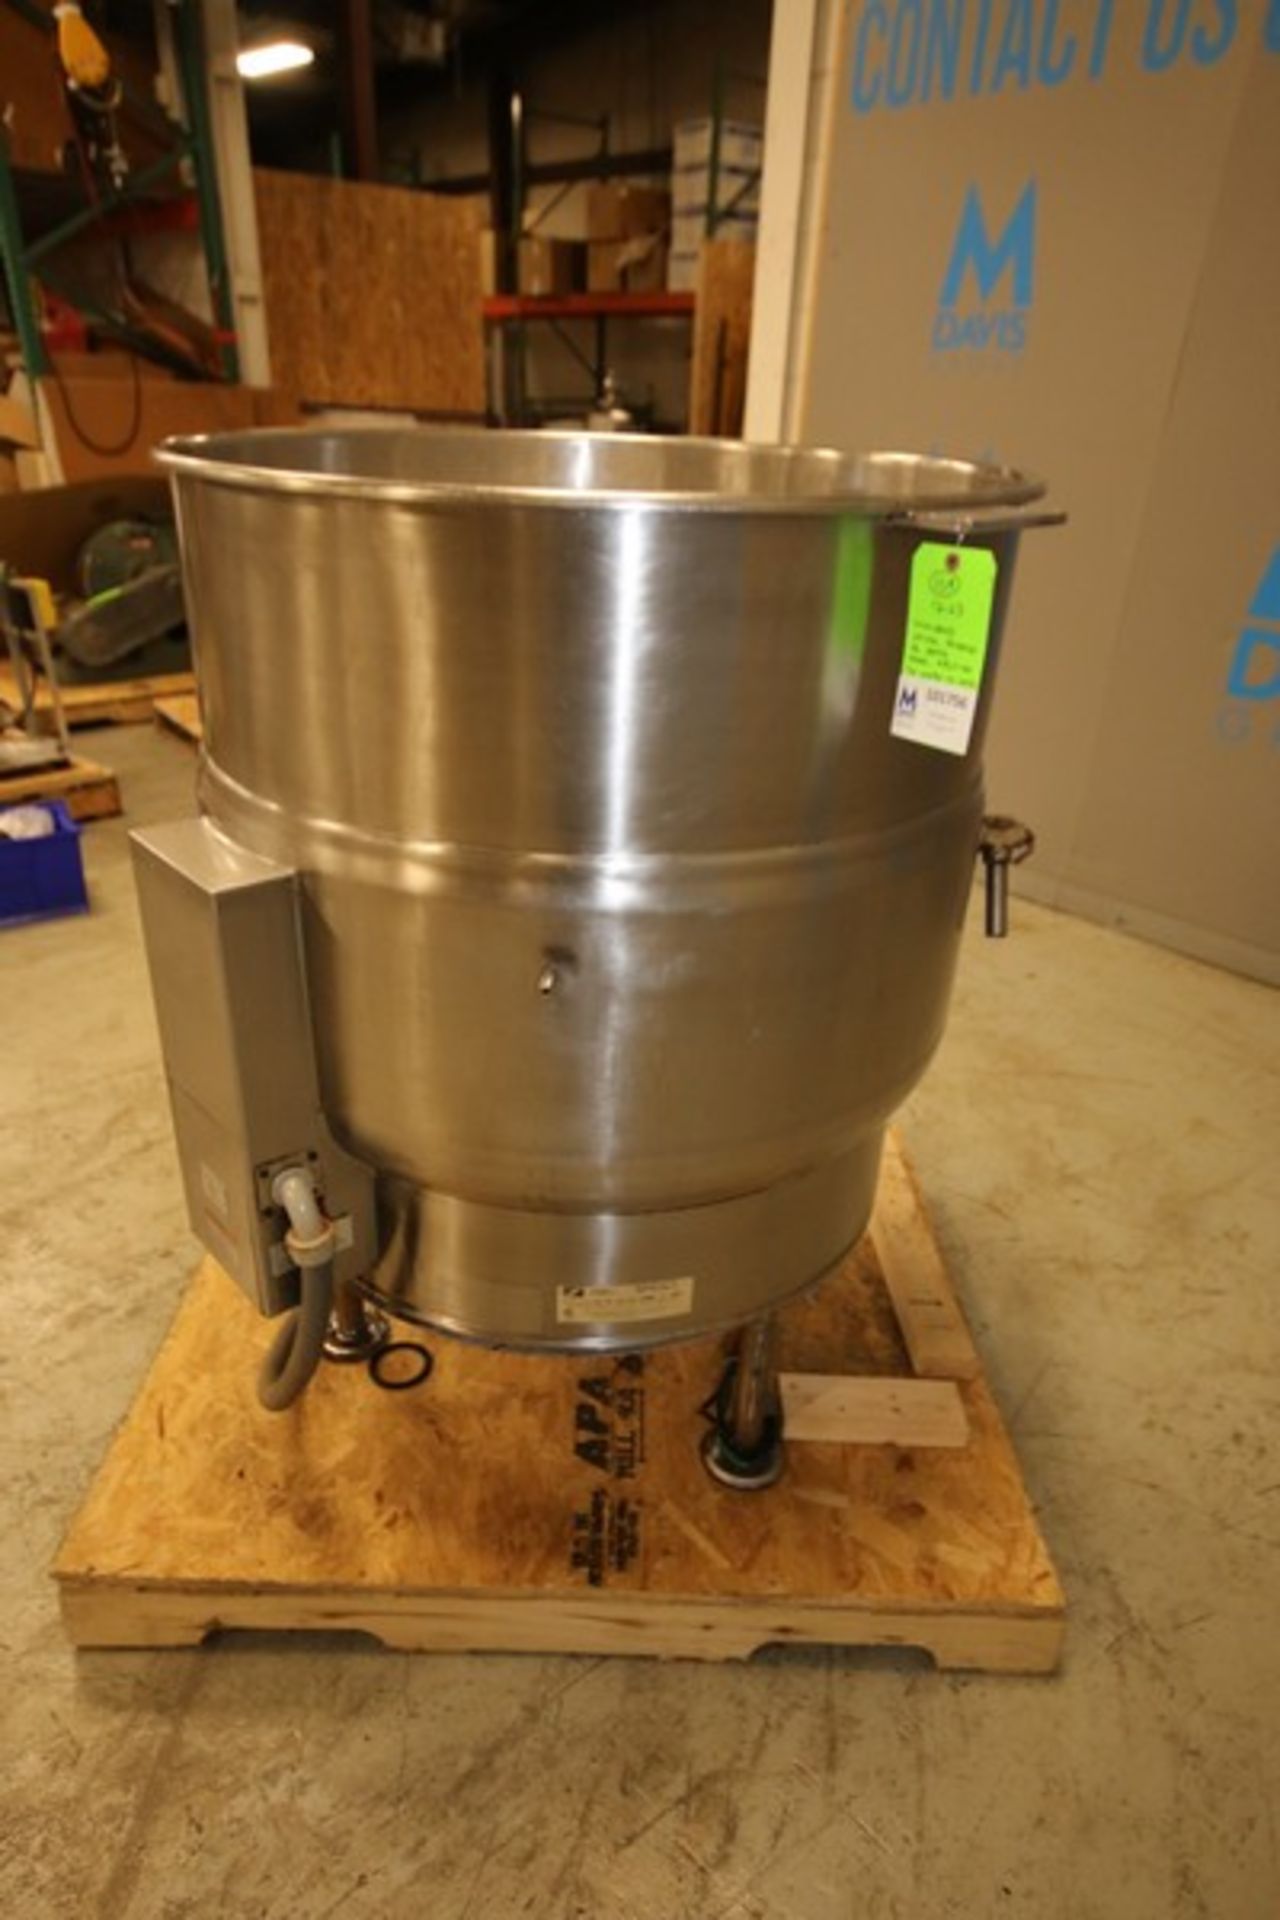 Southbend 100 Gallon S/S Jacketed Electric Kettle, Model KELS-100, SN 67090-7Z-3431 with 3" CT - Image 5 of 9